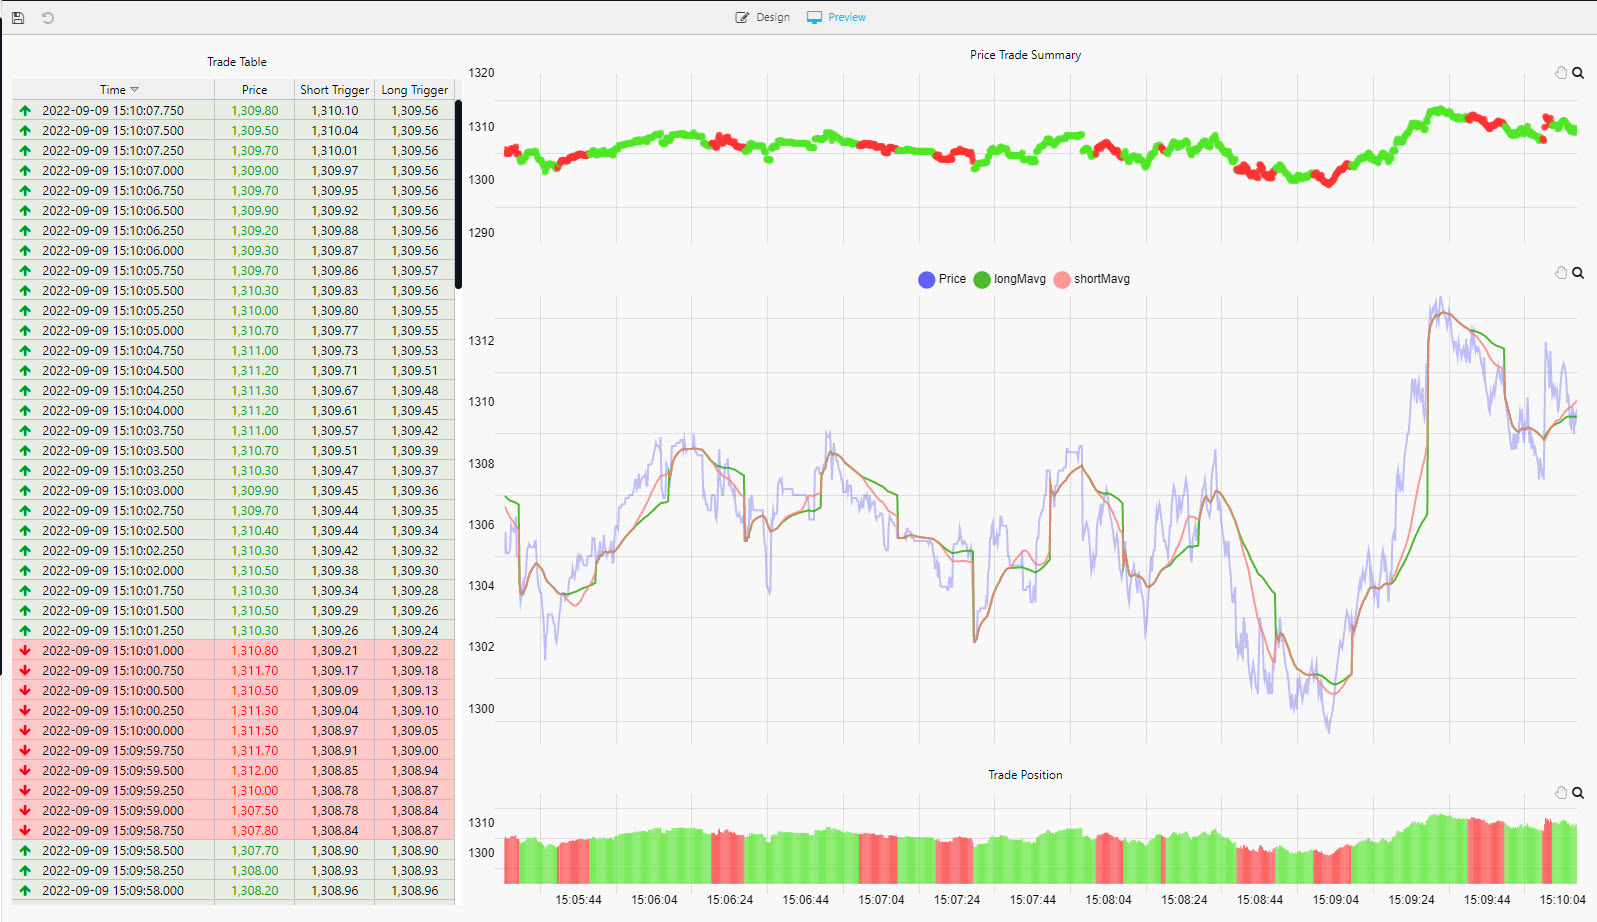 The Chart view shows the strategy position in the market; long trades are marked in green and short trades in red.